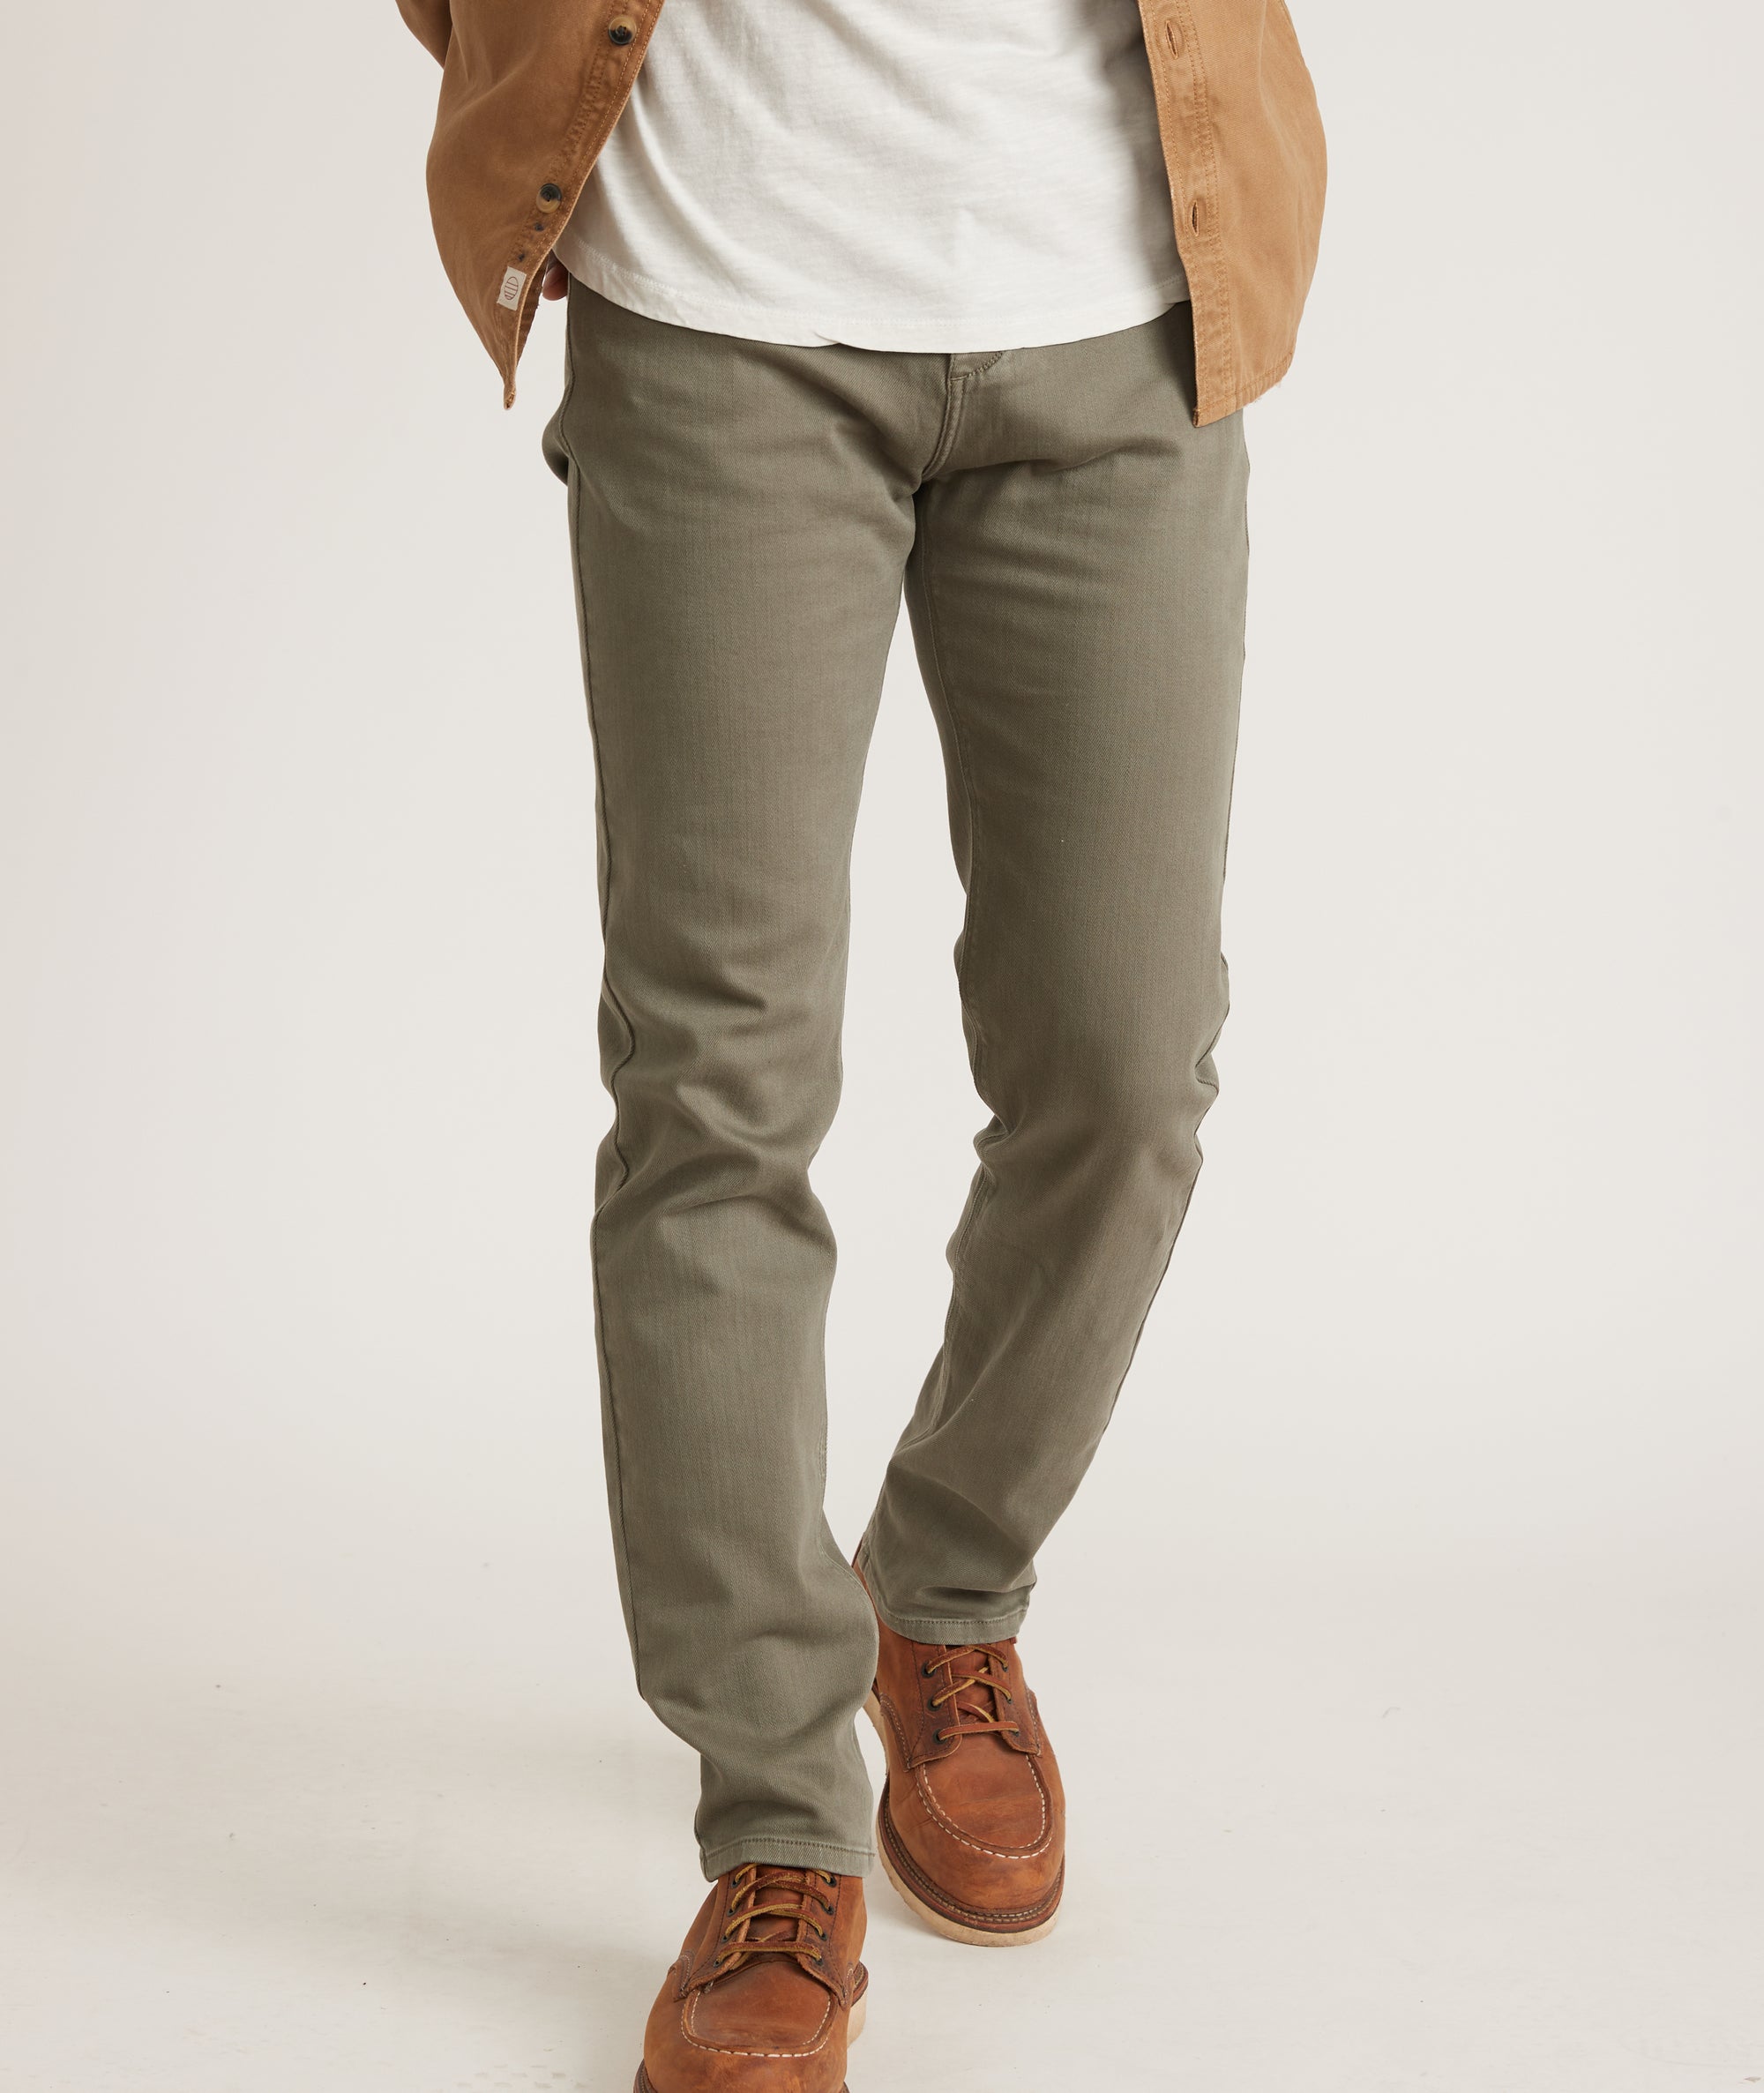 5 Pocket Pant Slim Faded in Fit – Olive Layer Marine